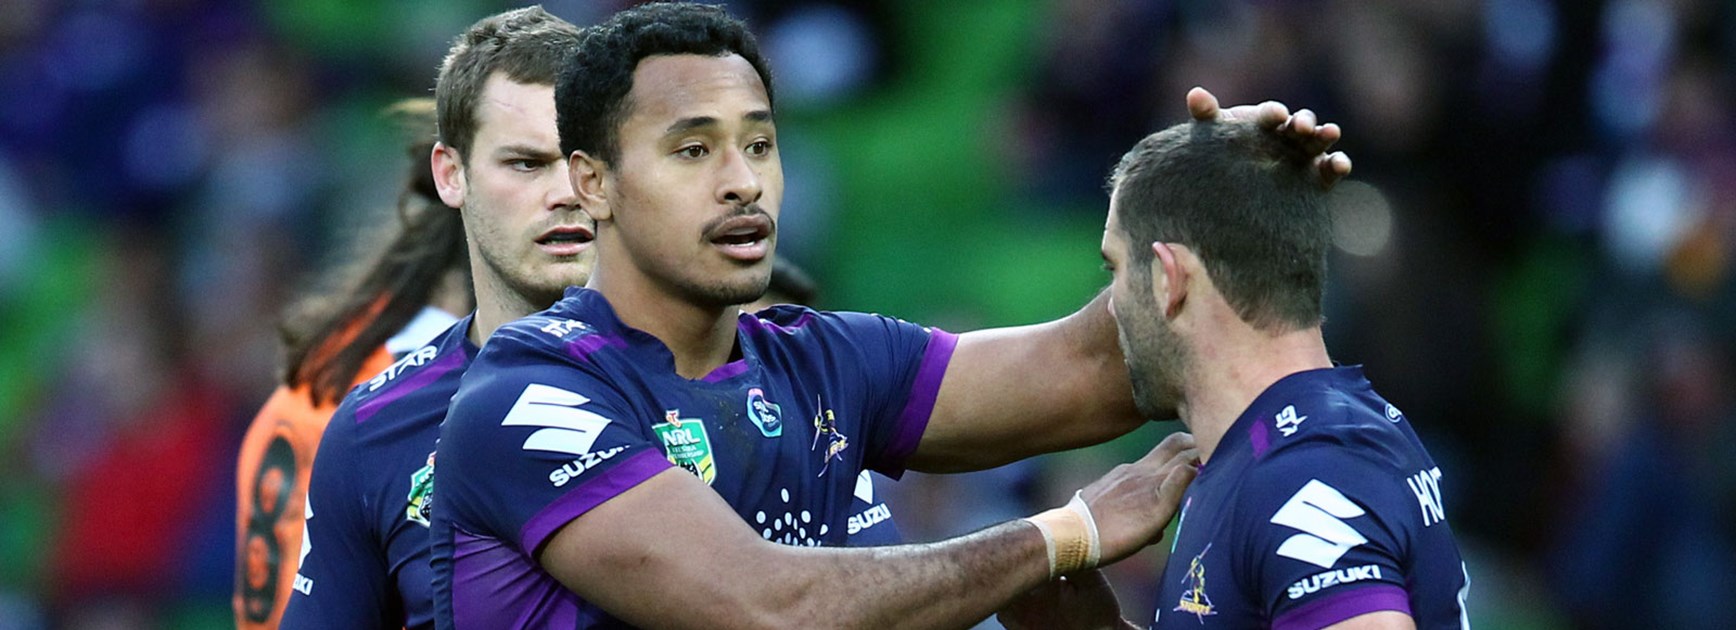 What role will Felise Kaufusi play at the Storm in 2017?